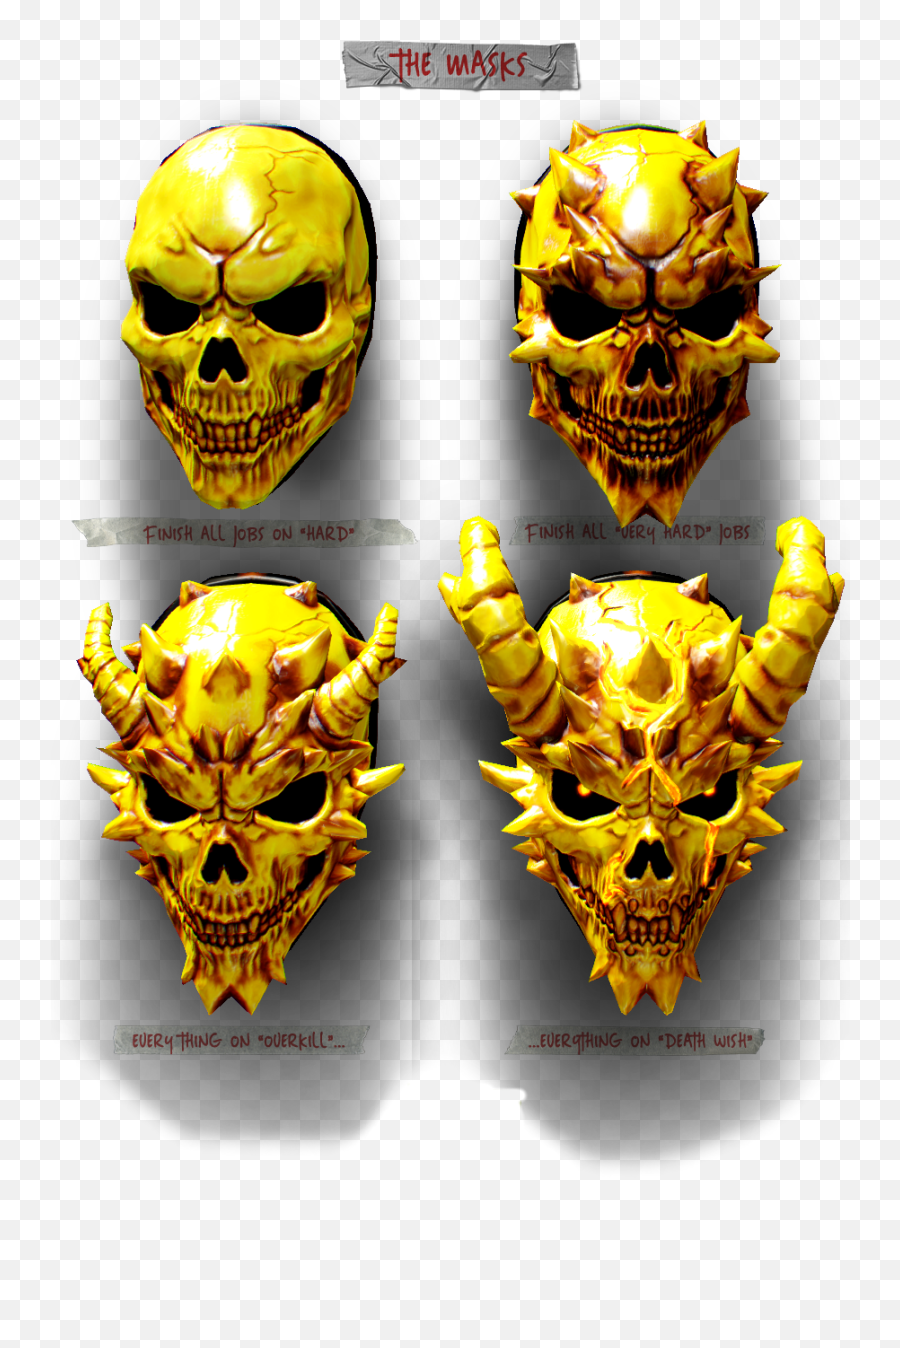 All Contracts - Deathwish Payday 2 Best Mask Emoji,Payday 2 Steam Profile Emoticon Art